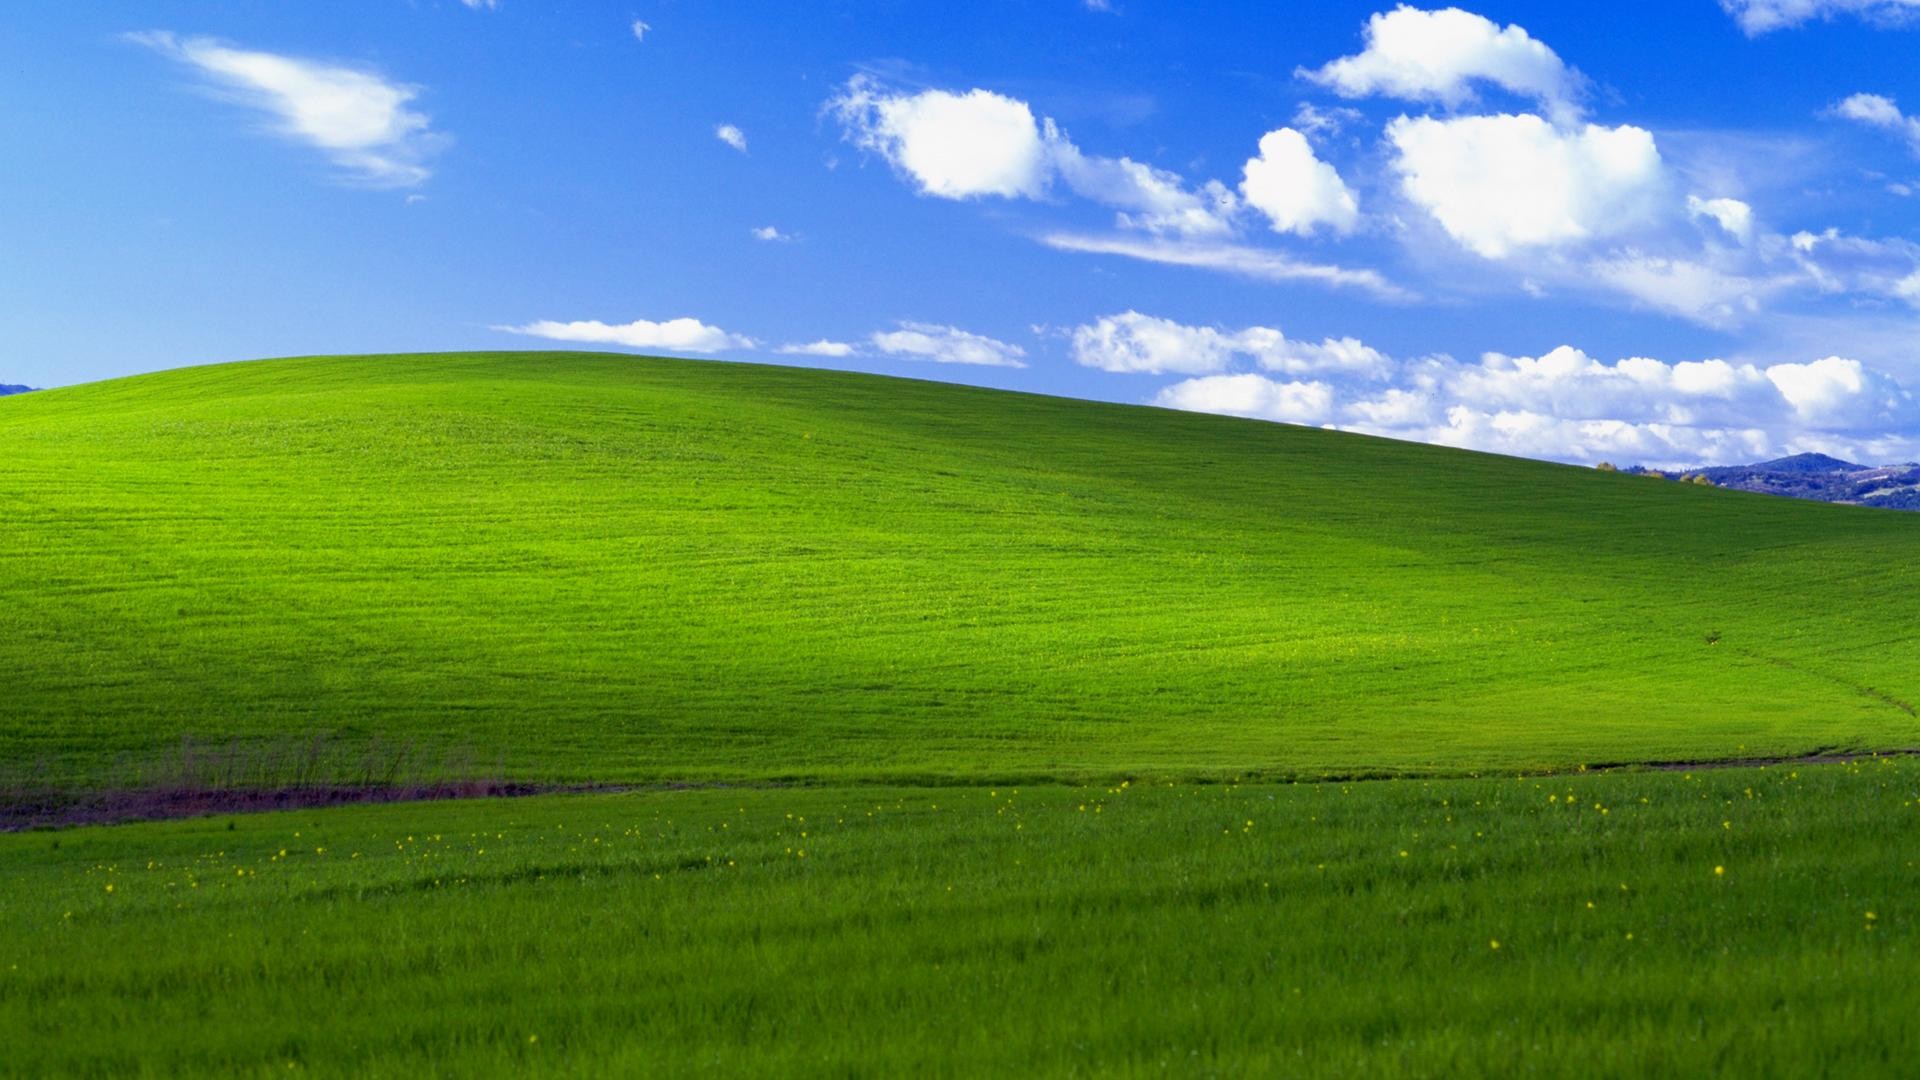 Anyone wanna do me a favor and glitch the Windows wallpaper for my new Linux installation